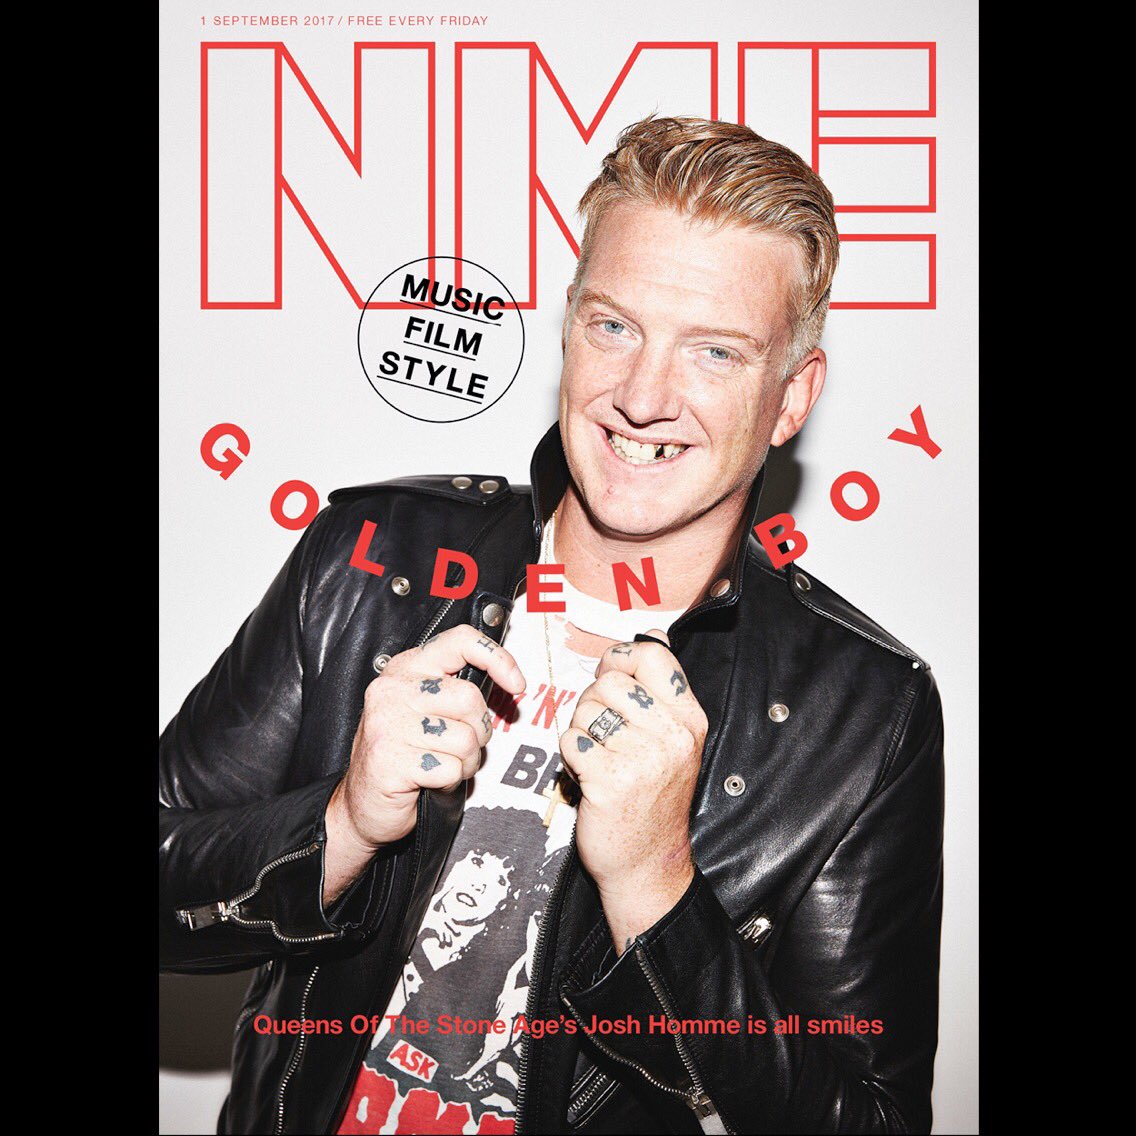 Josh Homme of Queens of the Stone Age on the cover of NME Magazine